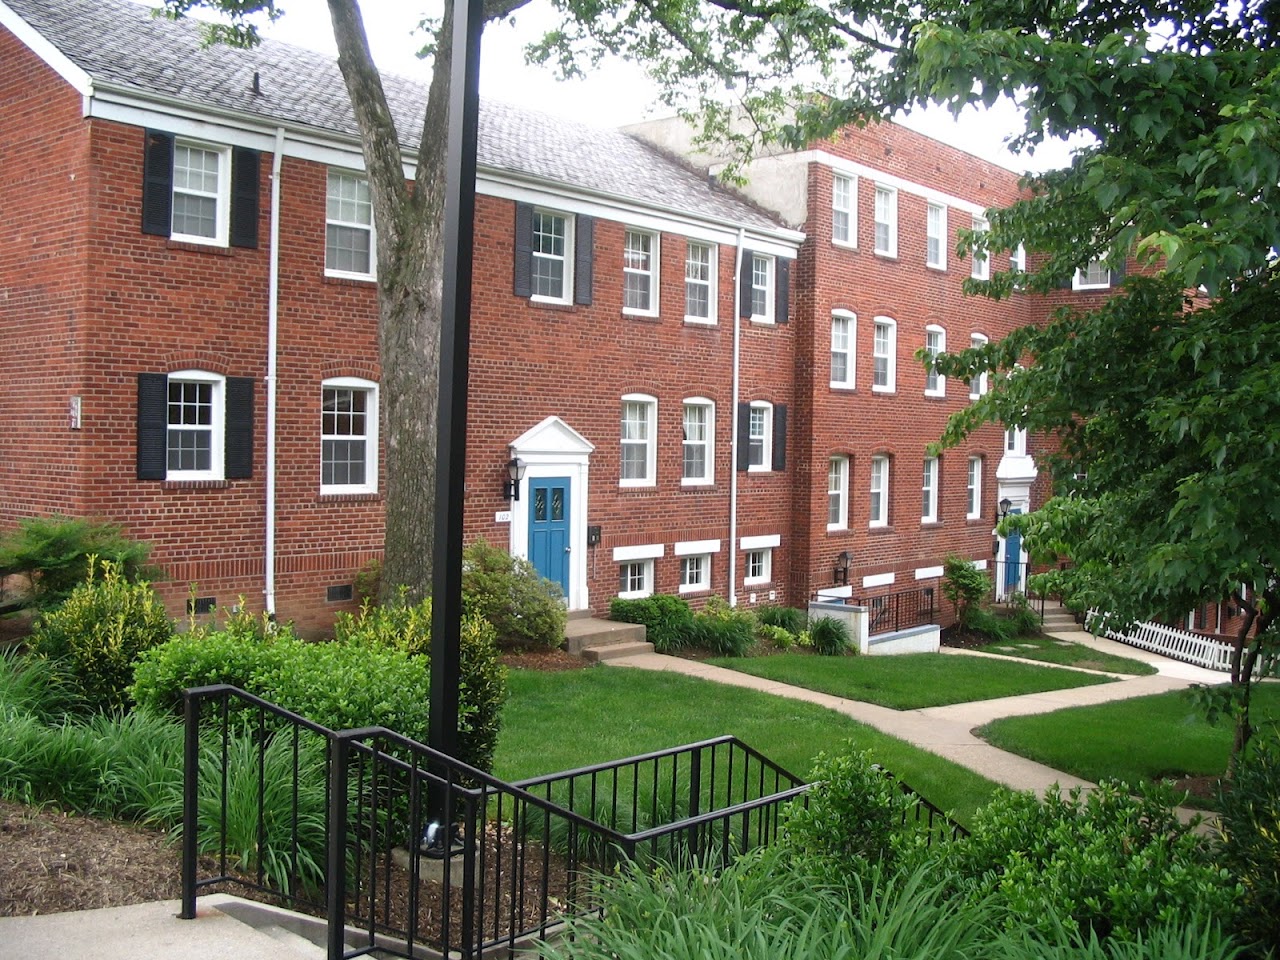 Photo of WHITEFIELD COMMONS. Affordable housing located at 204 N THOMAS ST ARLINGTON, VA 22203